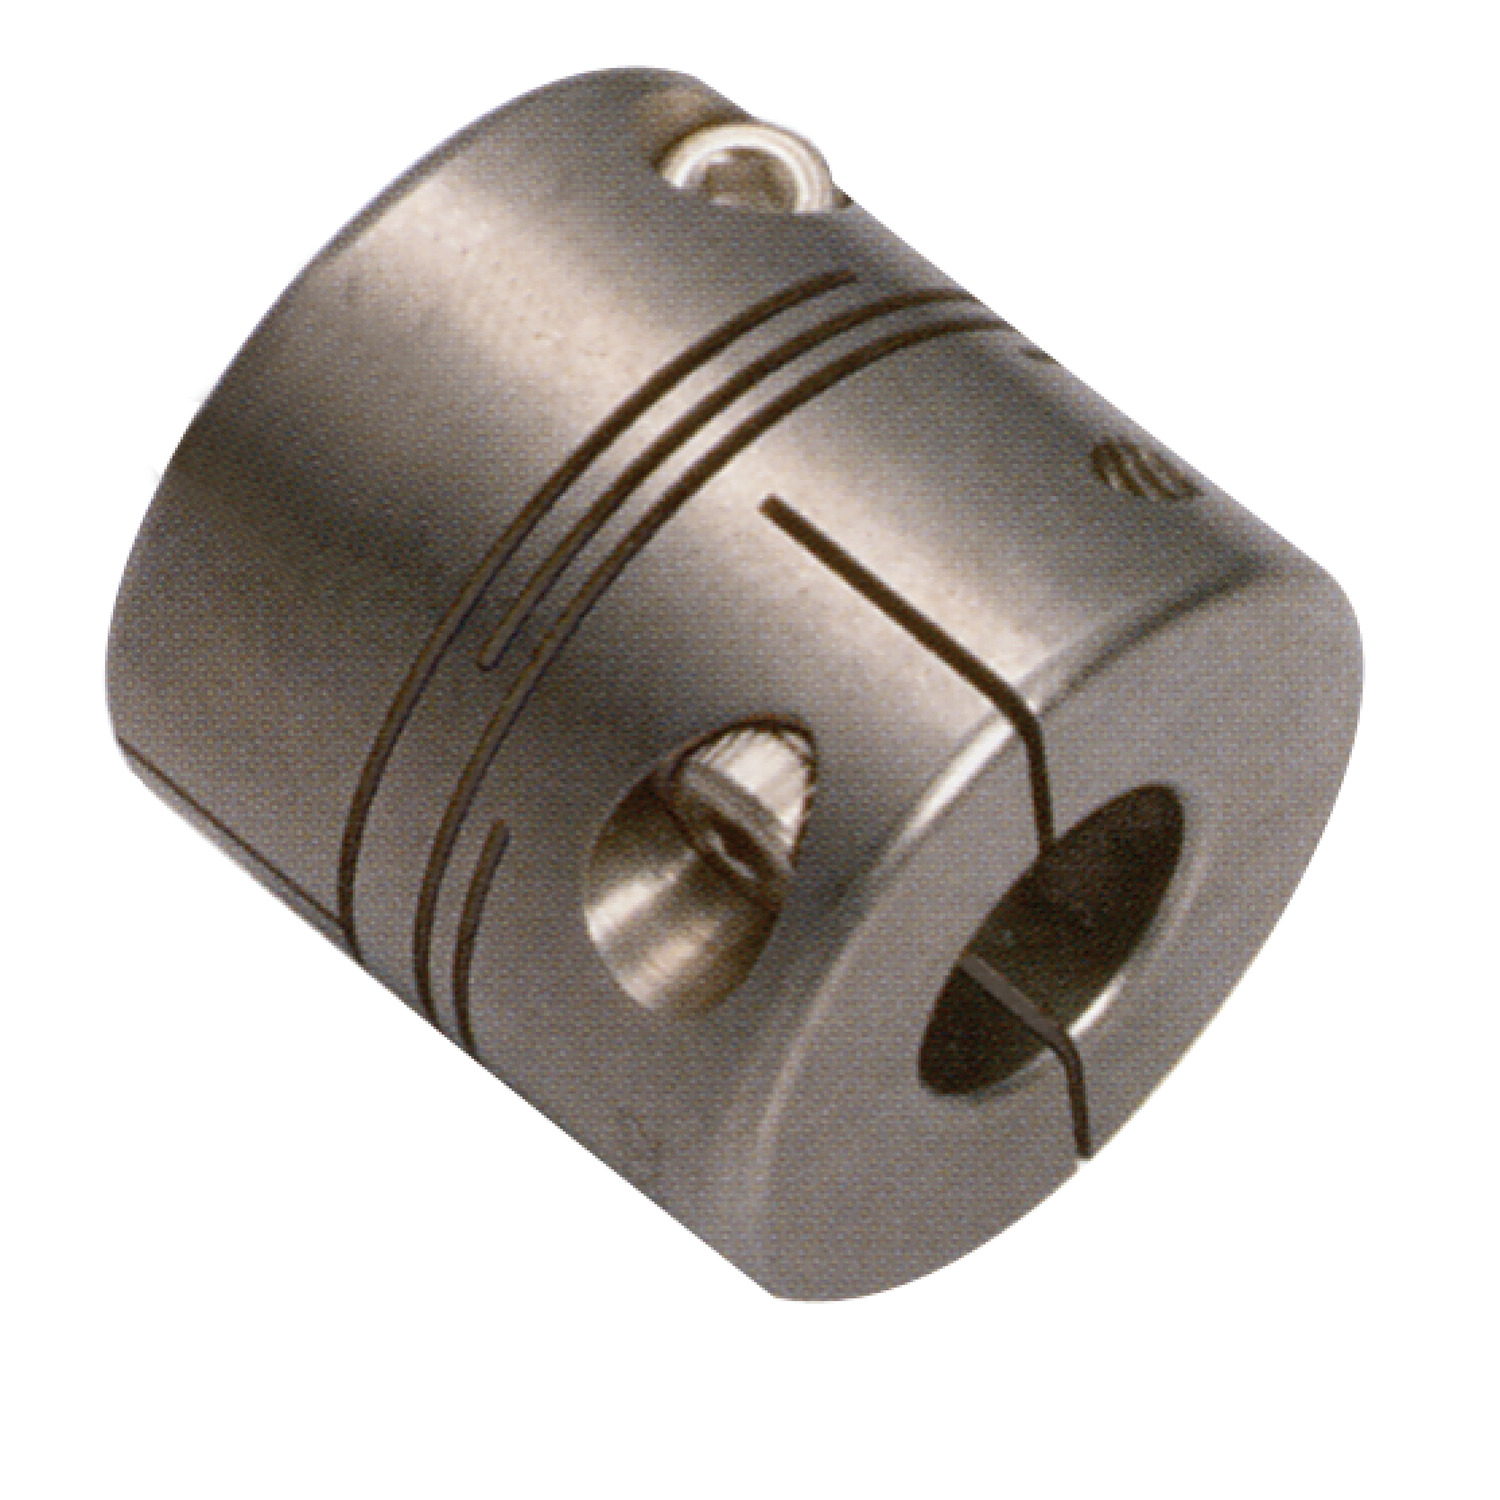 Product R3006.2, Spiral Beam Coupling - stainless steel clamping type - short type / 